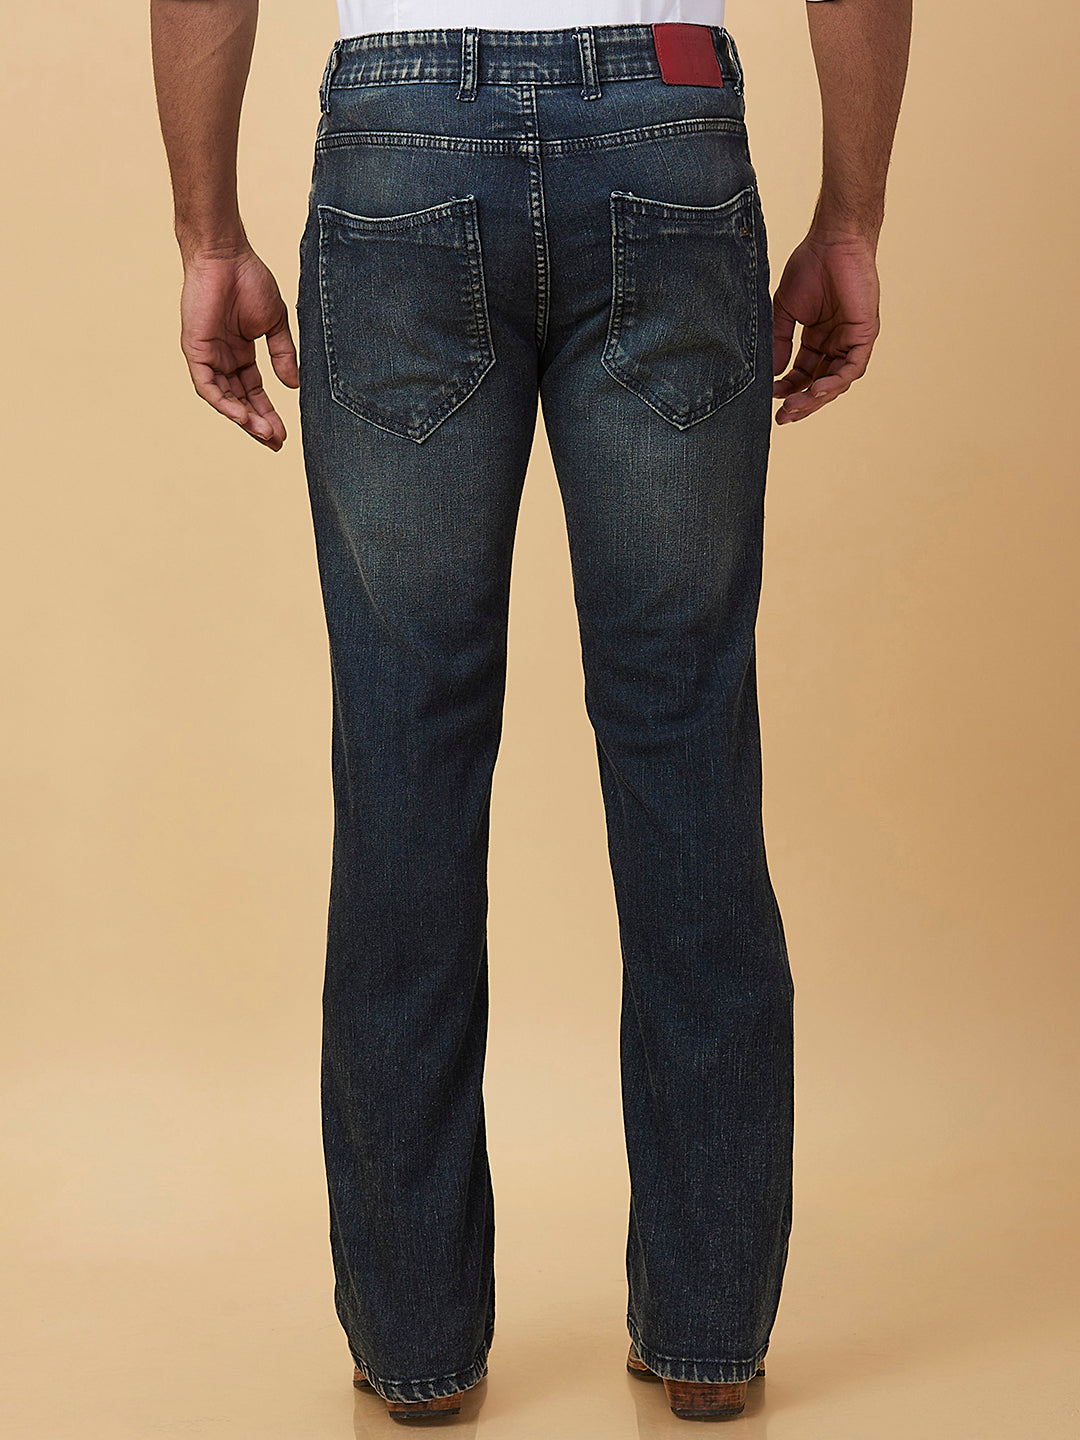 Indigo Blue Boot-cut Jeans and Vintage Tint